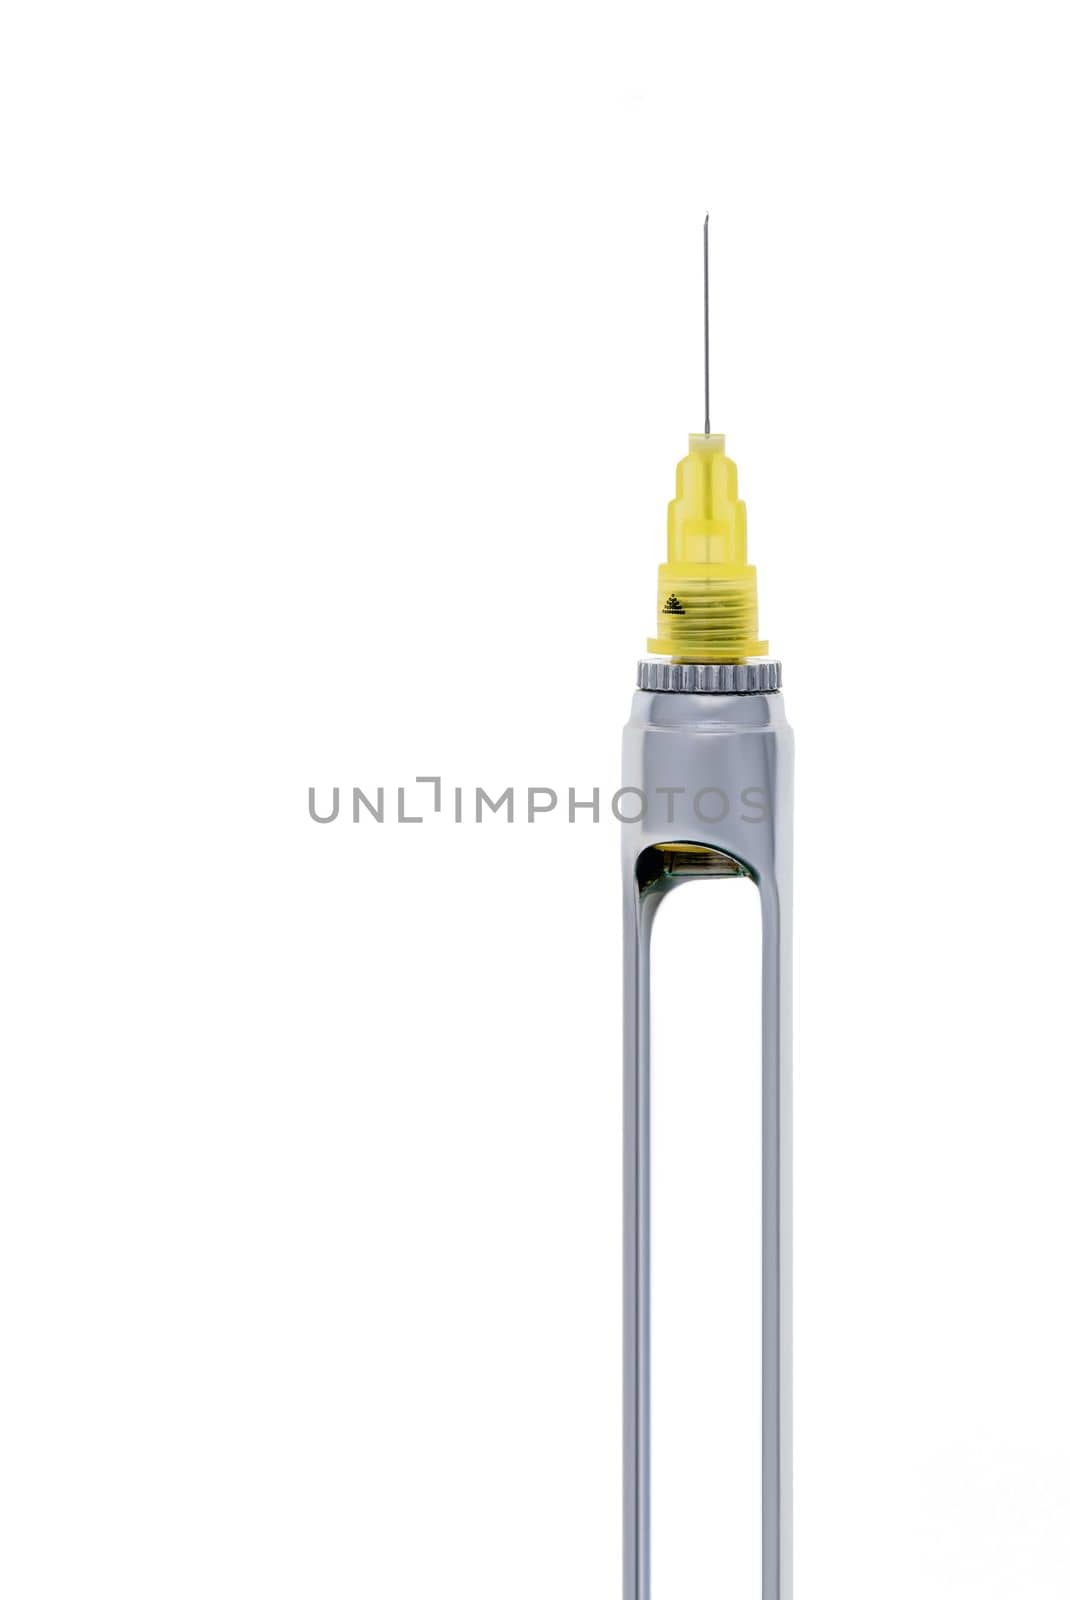 Steel dental syringe for local anesthesia, isolated on white. Carpool syringe for anesthesia in dentistry. Thin needle on a syringe for anesthesia in dentistry by EvgeniyQW